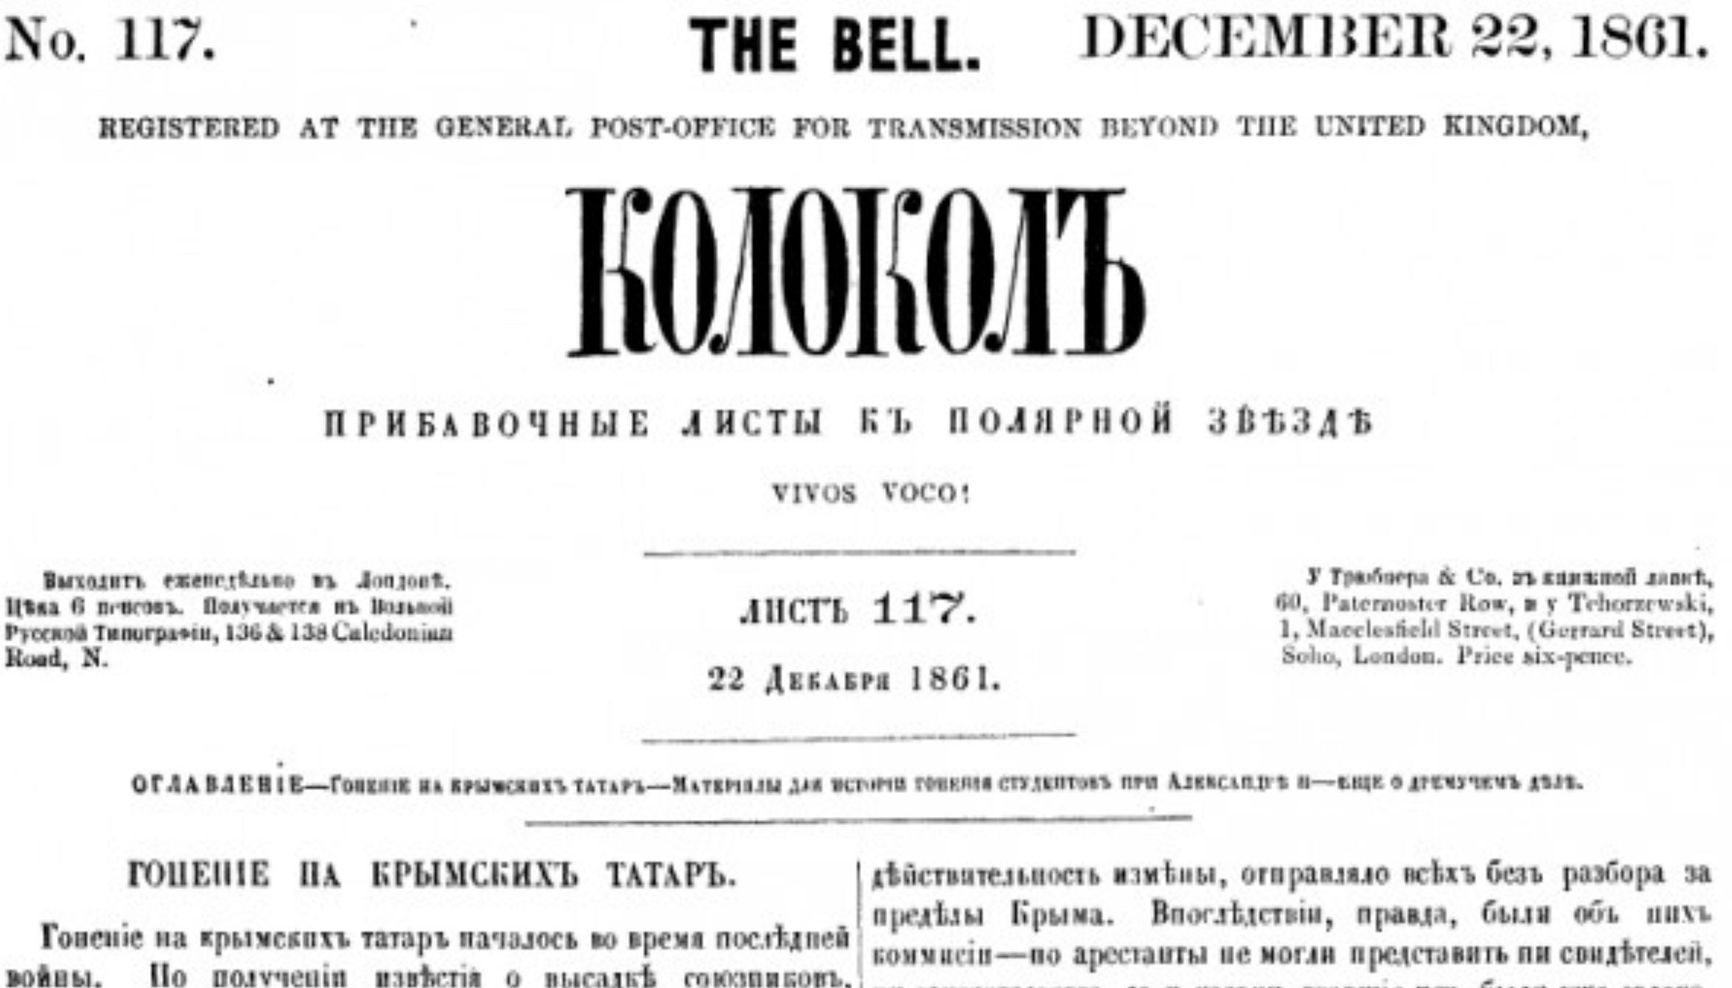 Title page of the Bell magazine